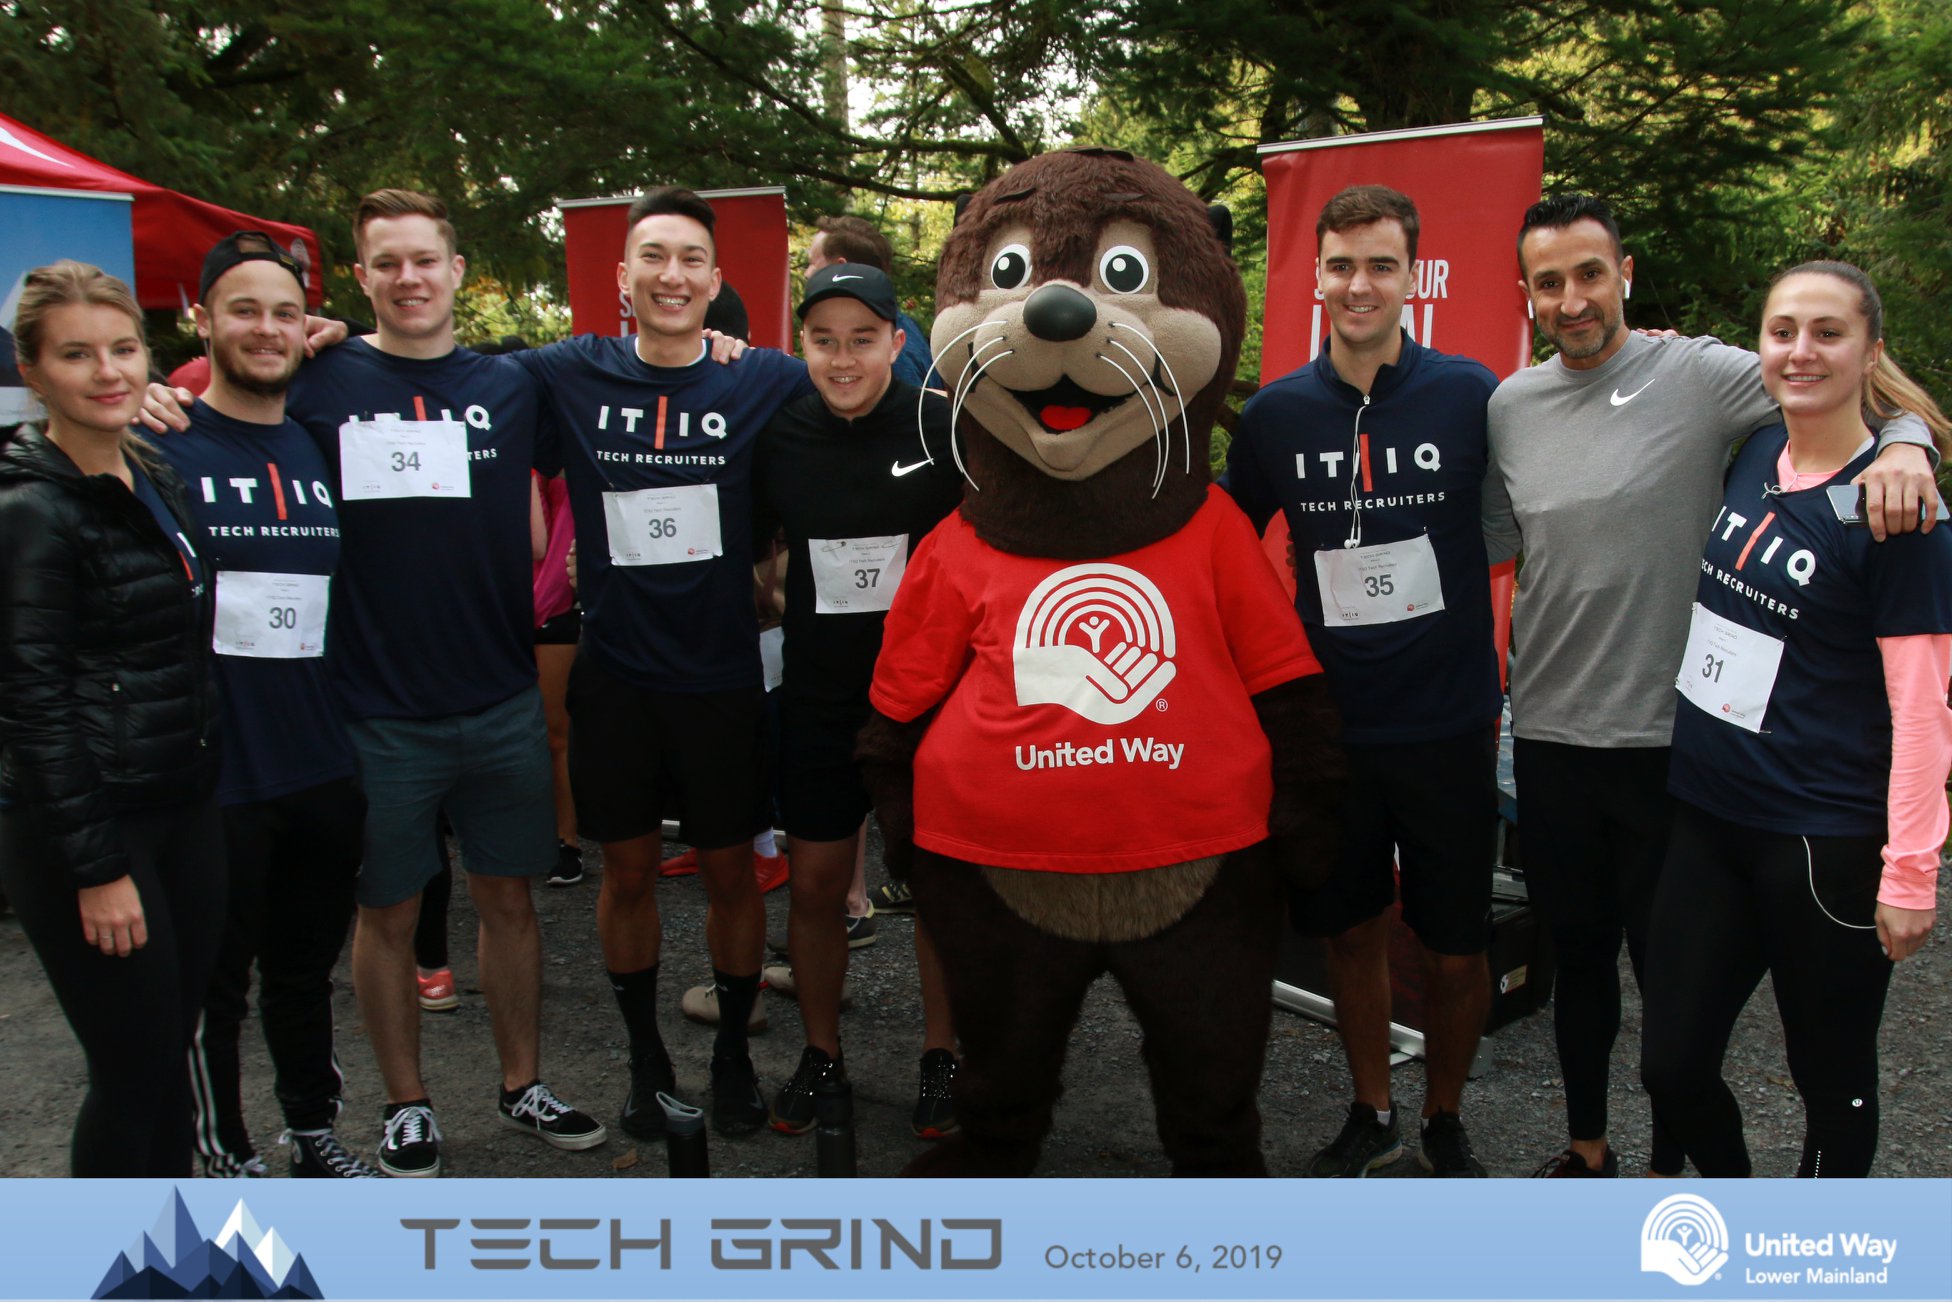 IT/IQ employee pose for a photo with otter mascot after the United Way Tech Grind 2019 trail run